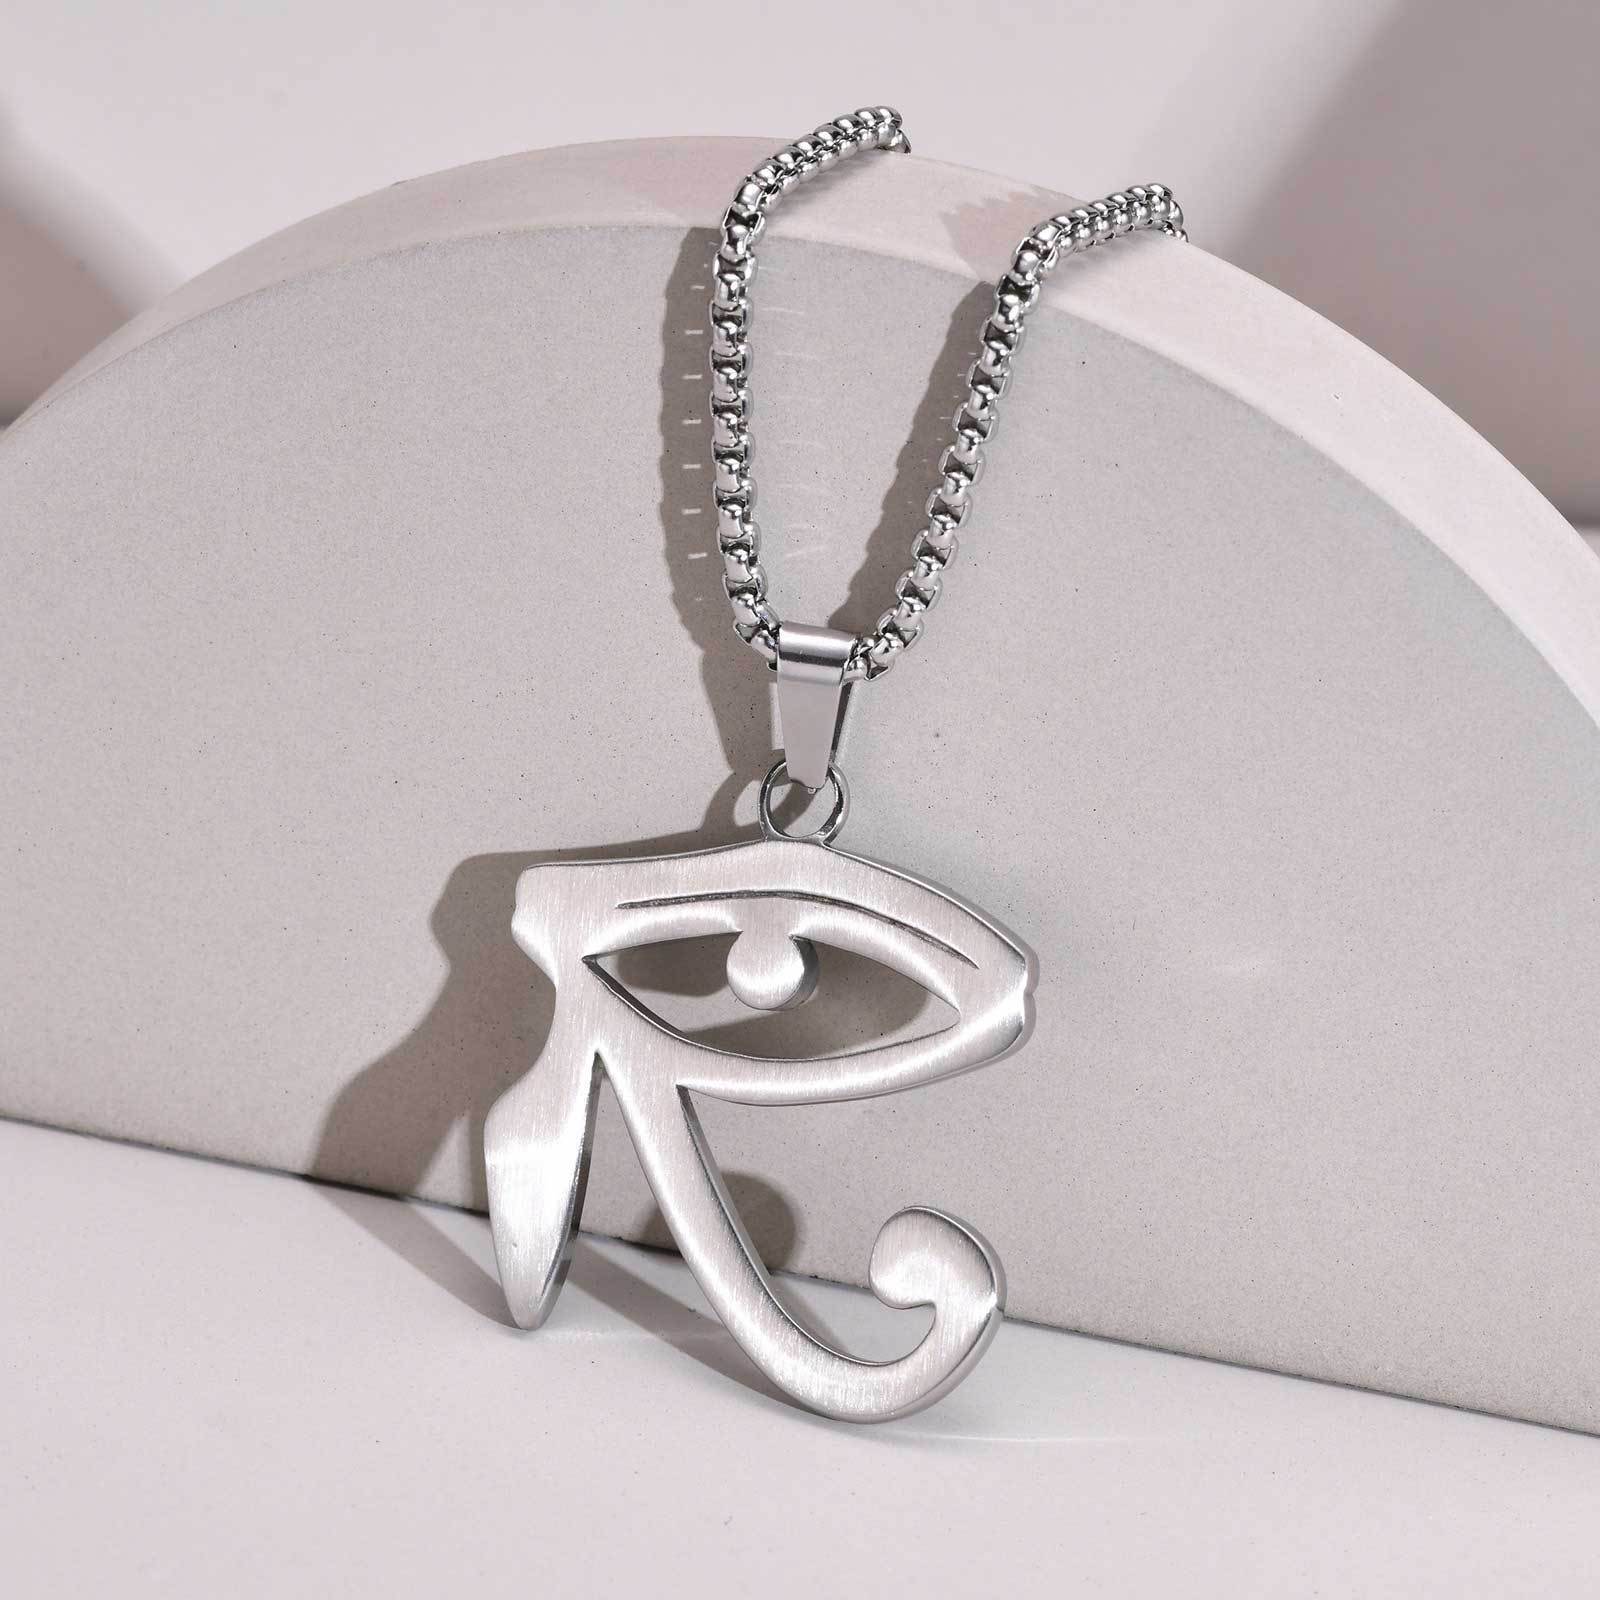 1:Steel Pendant, not included with chain